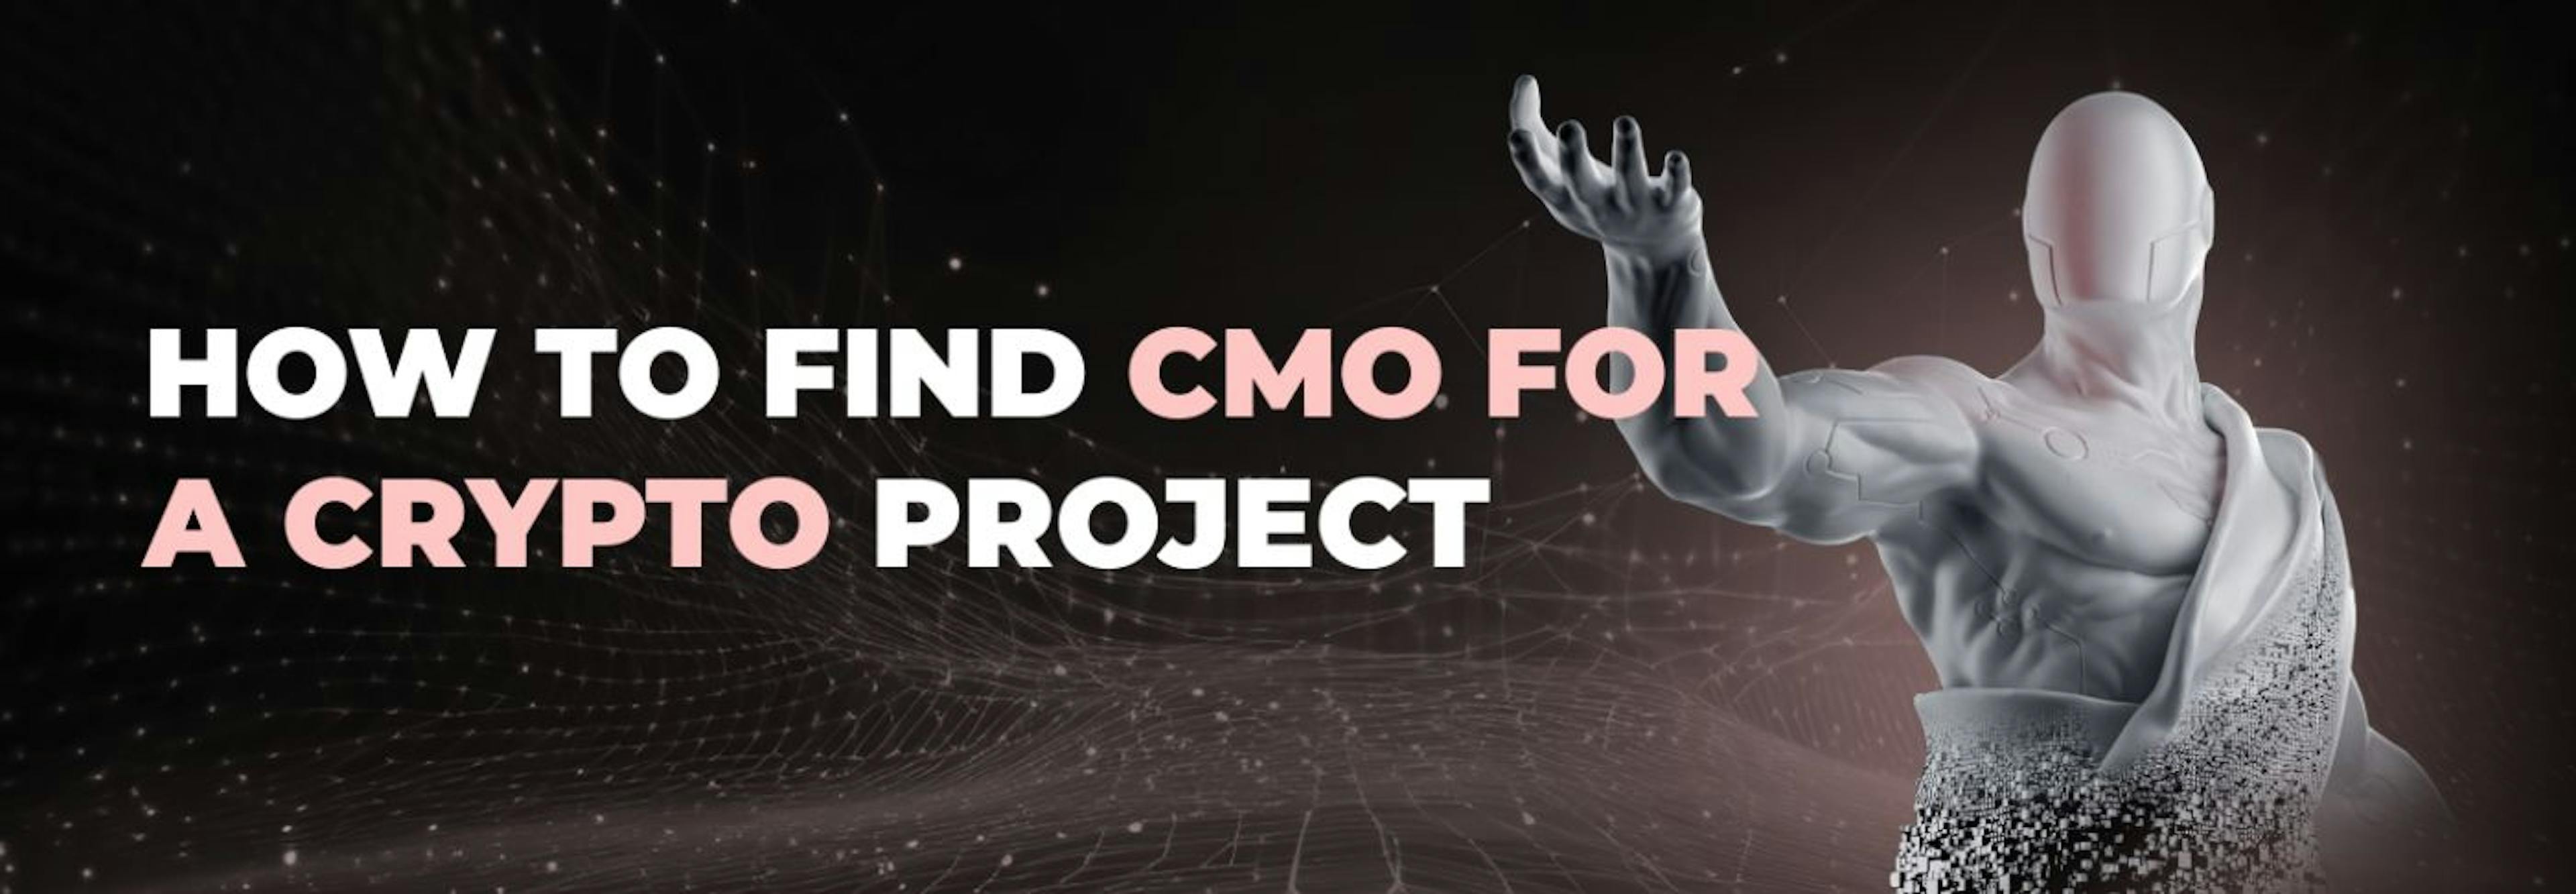 featured image - How to Find the Perfect CMO for Your Crypto Project